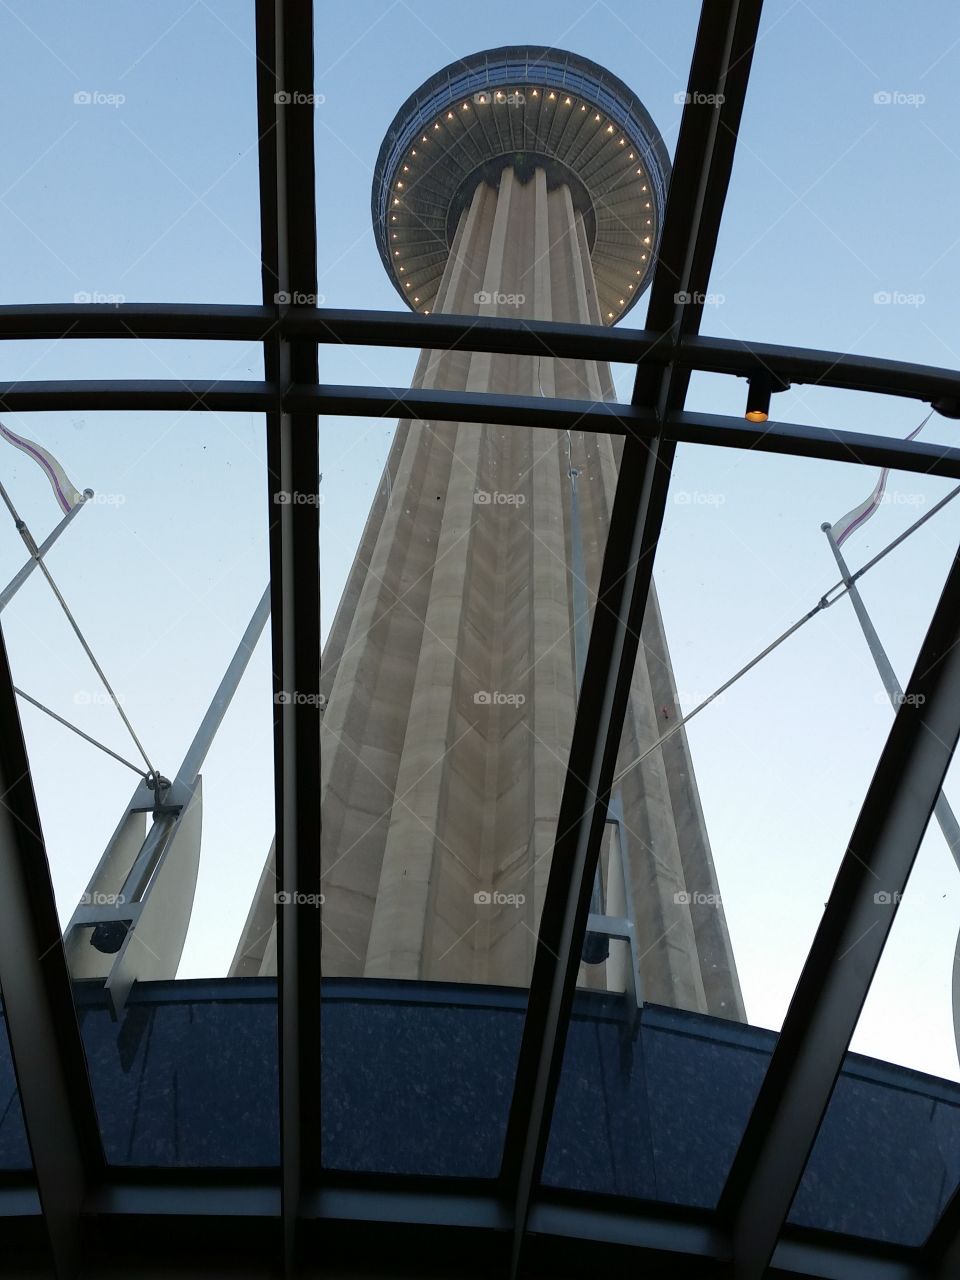 Tower of America. This is the view from the bottom of the tower looking up.